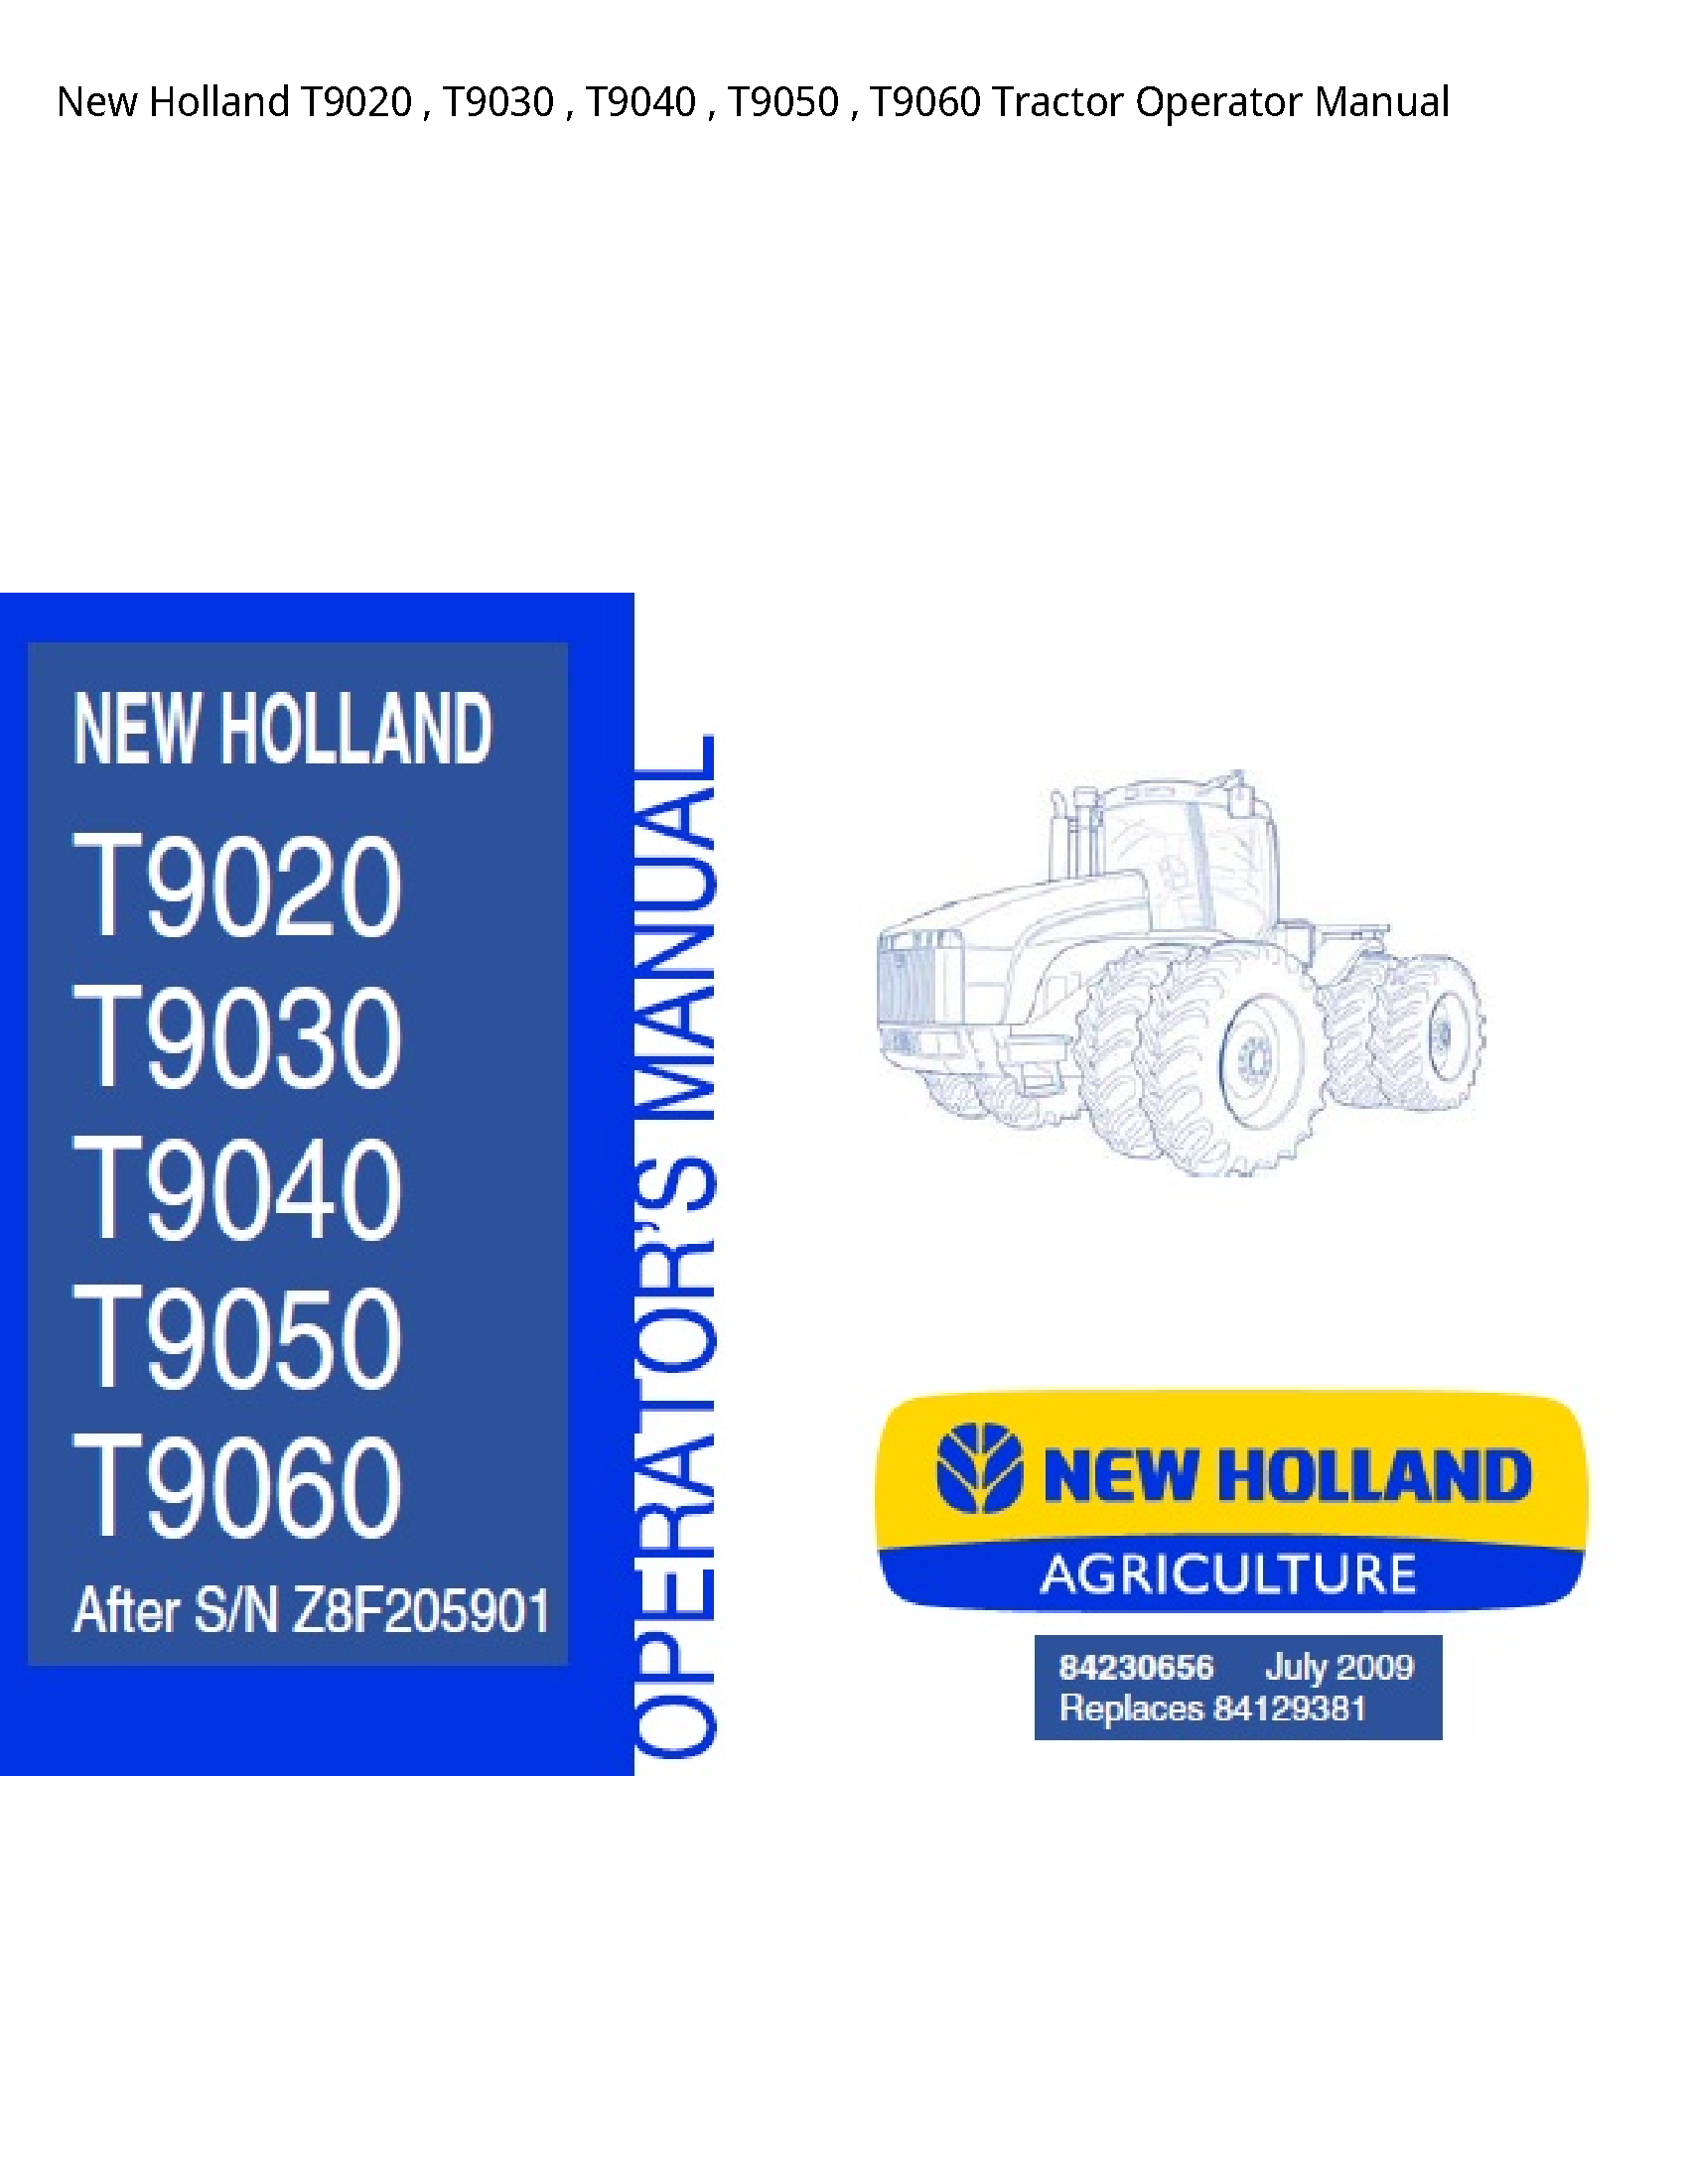 New Holland T9020 Tractor Operator manual